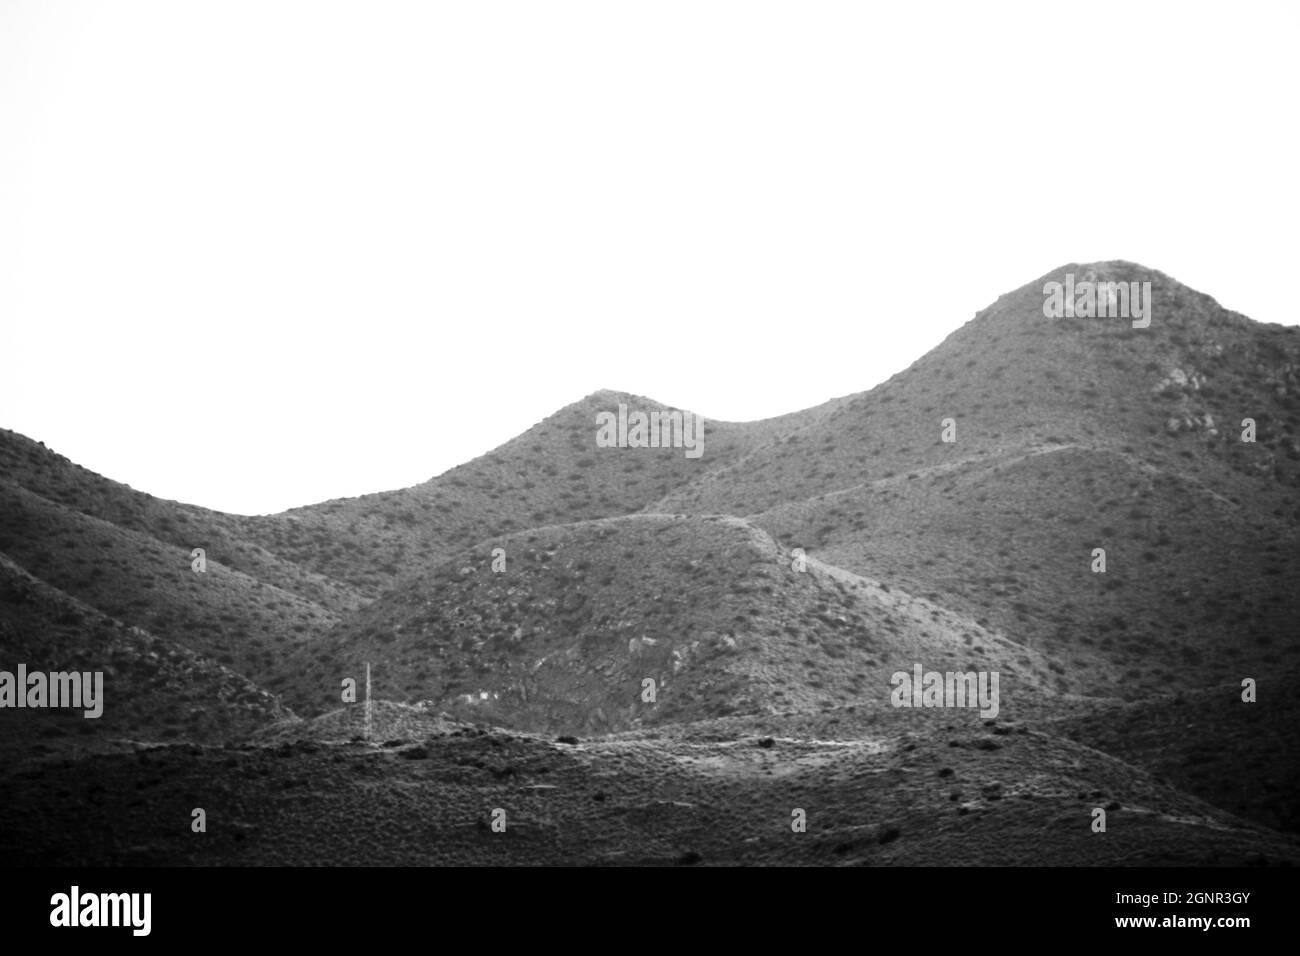 Clear morning sky with silhouettes of mountains in Spain. Monochrome picture. Stock Photo